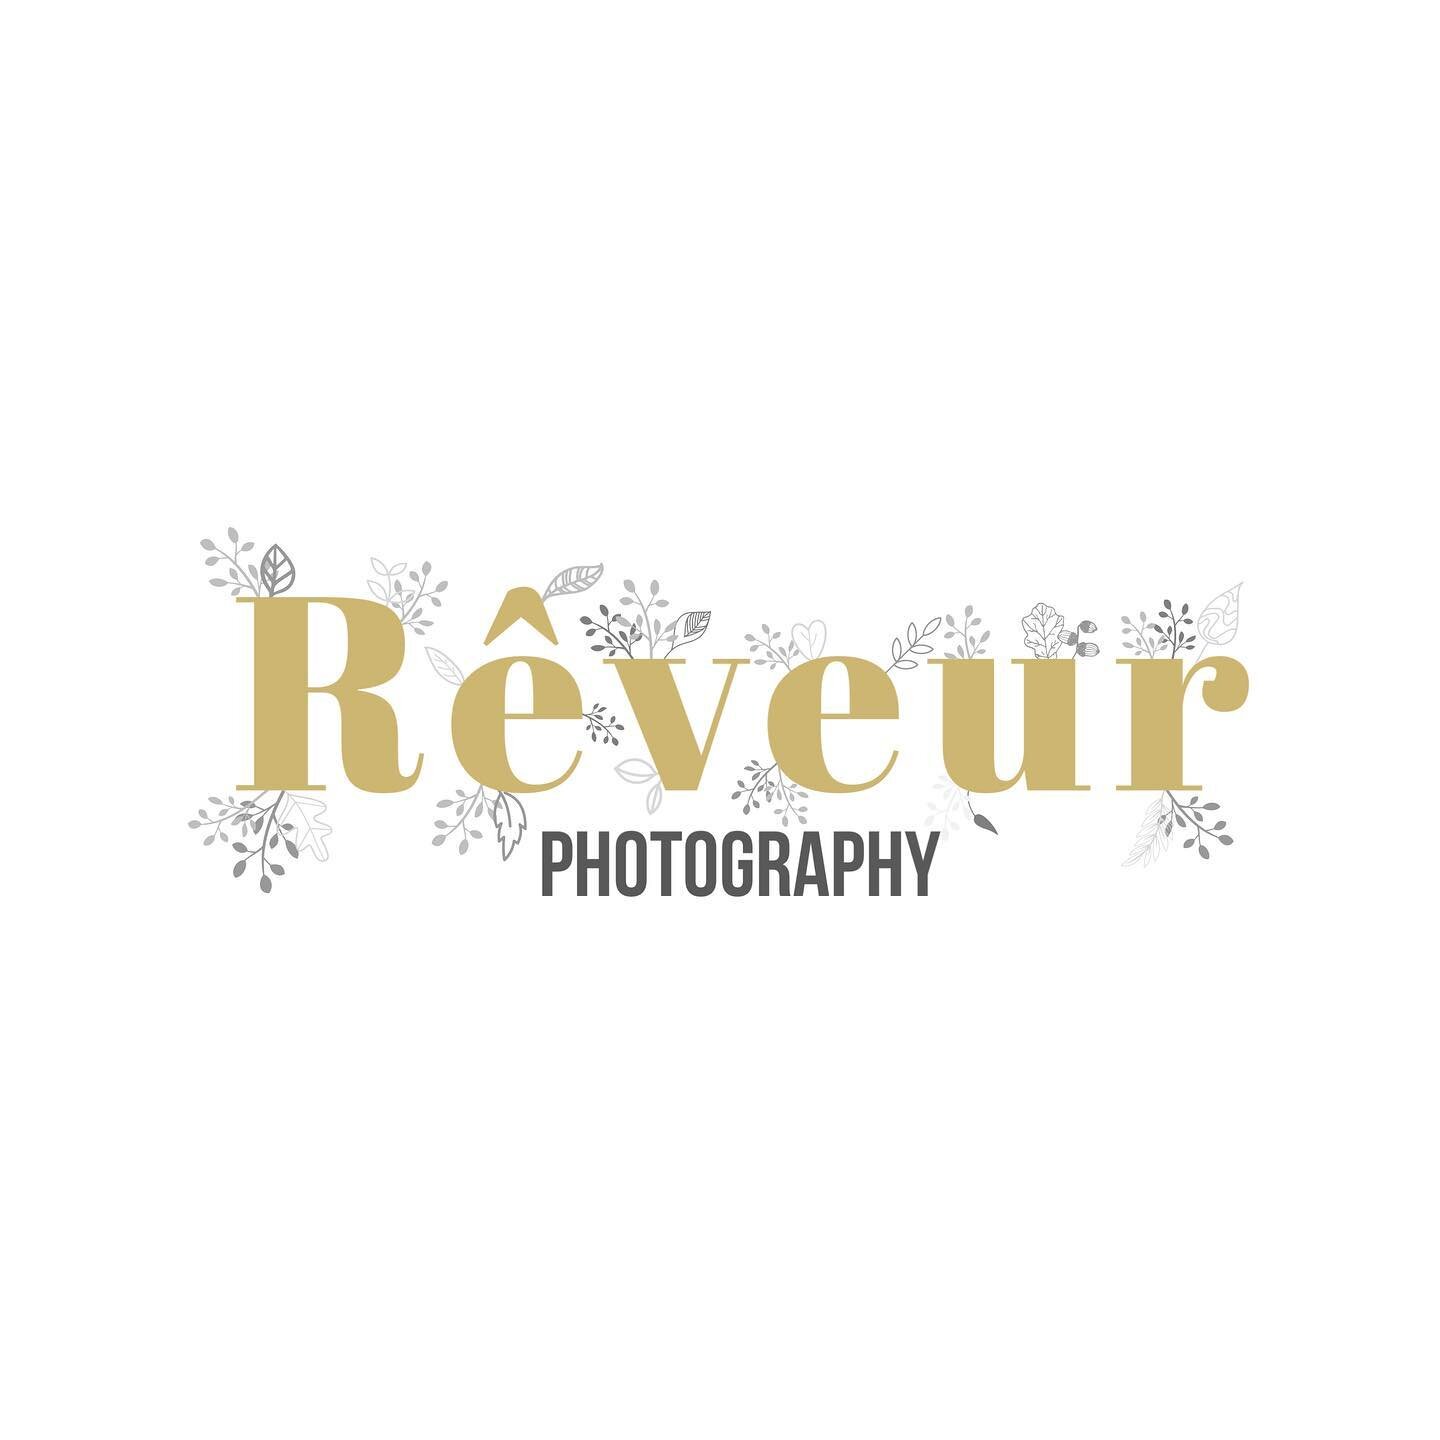 Welcome to R&ecirc;veur Photography- we are a wedding photographer based in Vancouver, British Columbia Canada, specializing in wedding, engagement and lifestyle portraits. #weddingphotography #vancouver #vancouverwedding #vancouverweddingphotographe